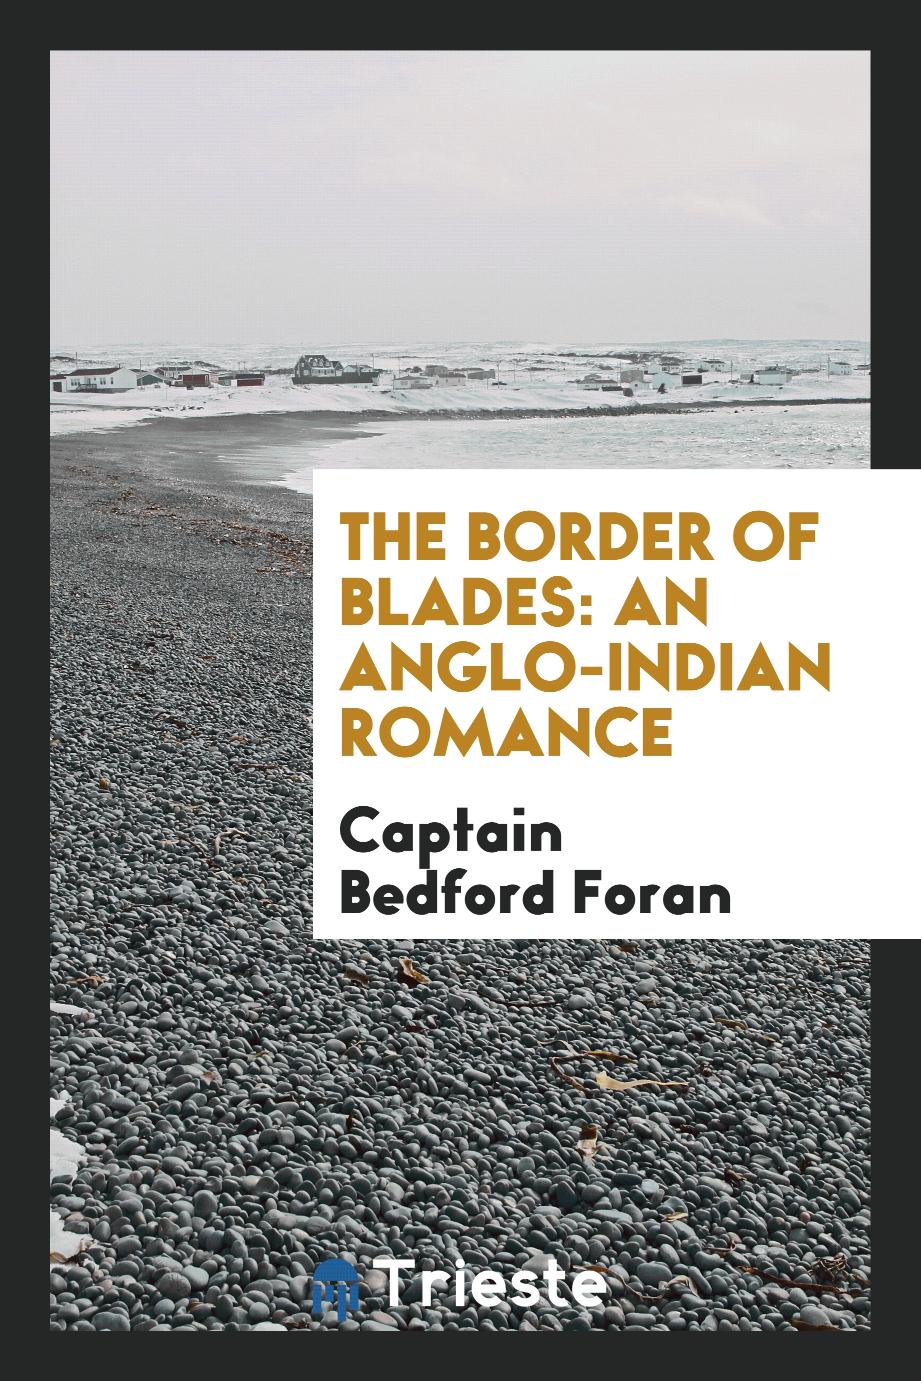 The border of Blades: an anglo-Indian romance